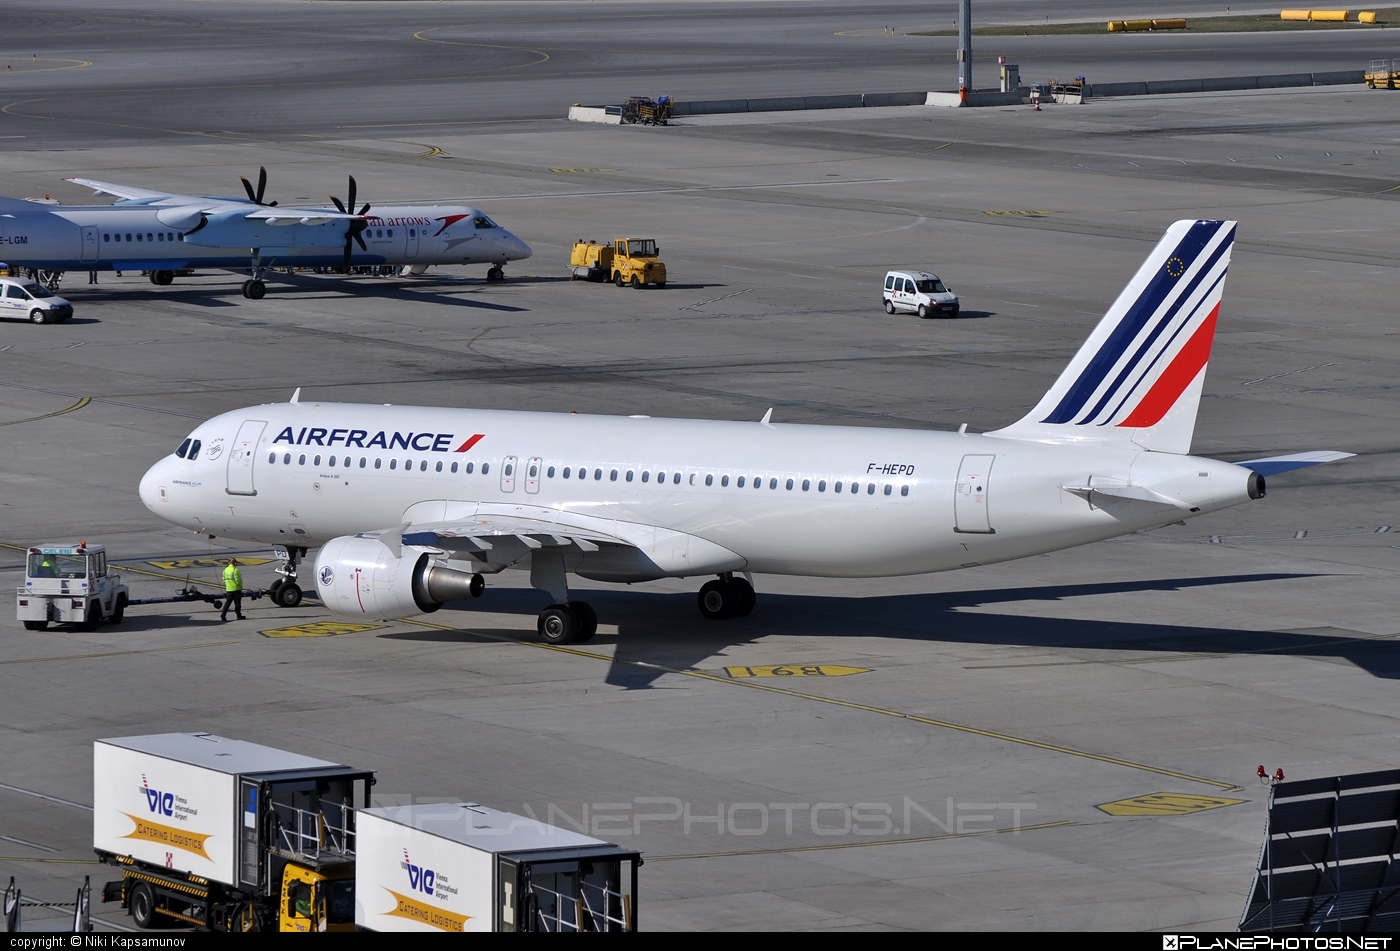 Airbus A320-214 - F-HEPD operated by Air France #a320 #a320family #airbus #airbus320 #airfrance